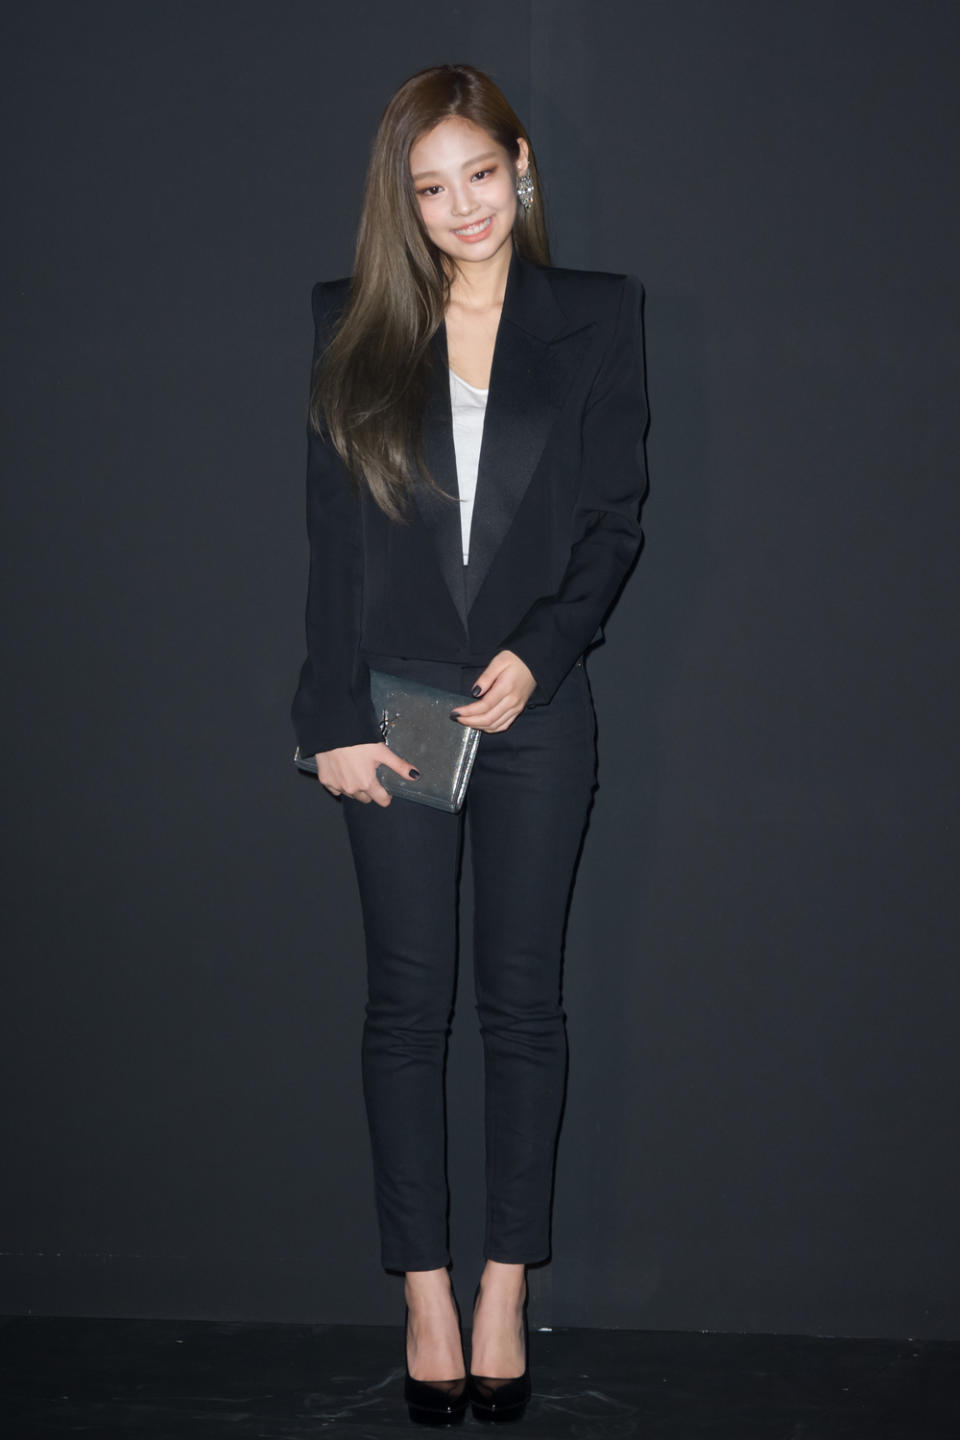 SEOUL, SOUTH KOREA - MARCH 27: BLACKPINK Jennie attends the photocall for 'Saint Laurent by Anthony Vaccarello' on March 27, 2017 in Seoul, South Korea. (Photo by Choi Soo-Young/Imazins via Getty Images)